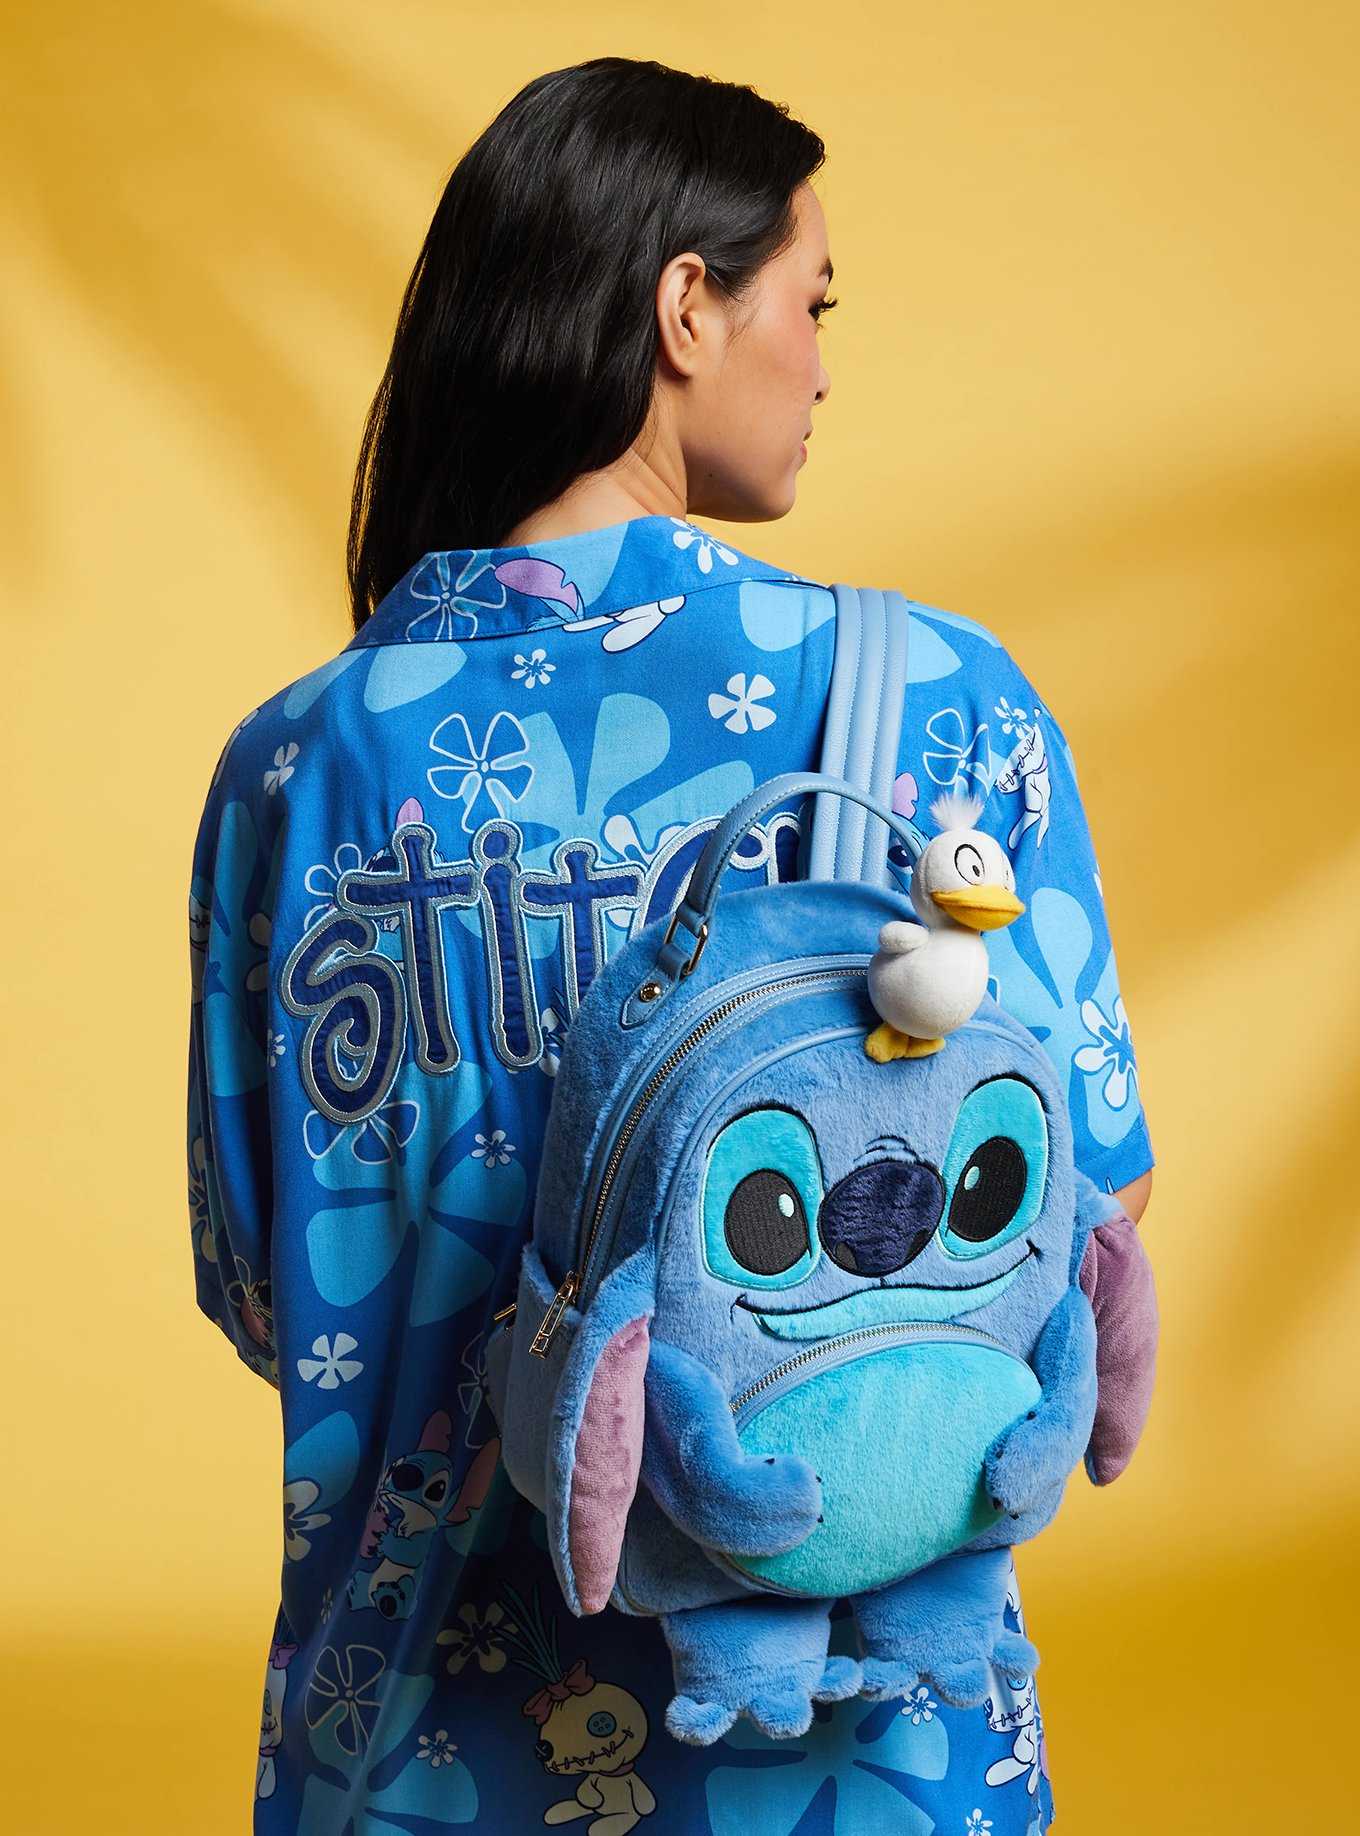 Our Universe Disney Lilo & Stitch Duckling Plush Mini Backpack — BoxLunch Exclusive, , hi-res